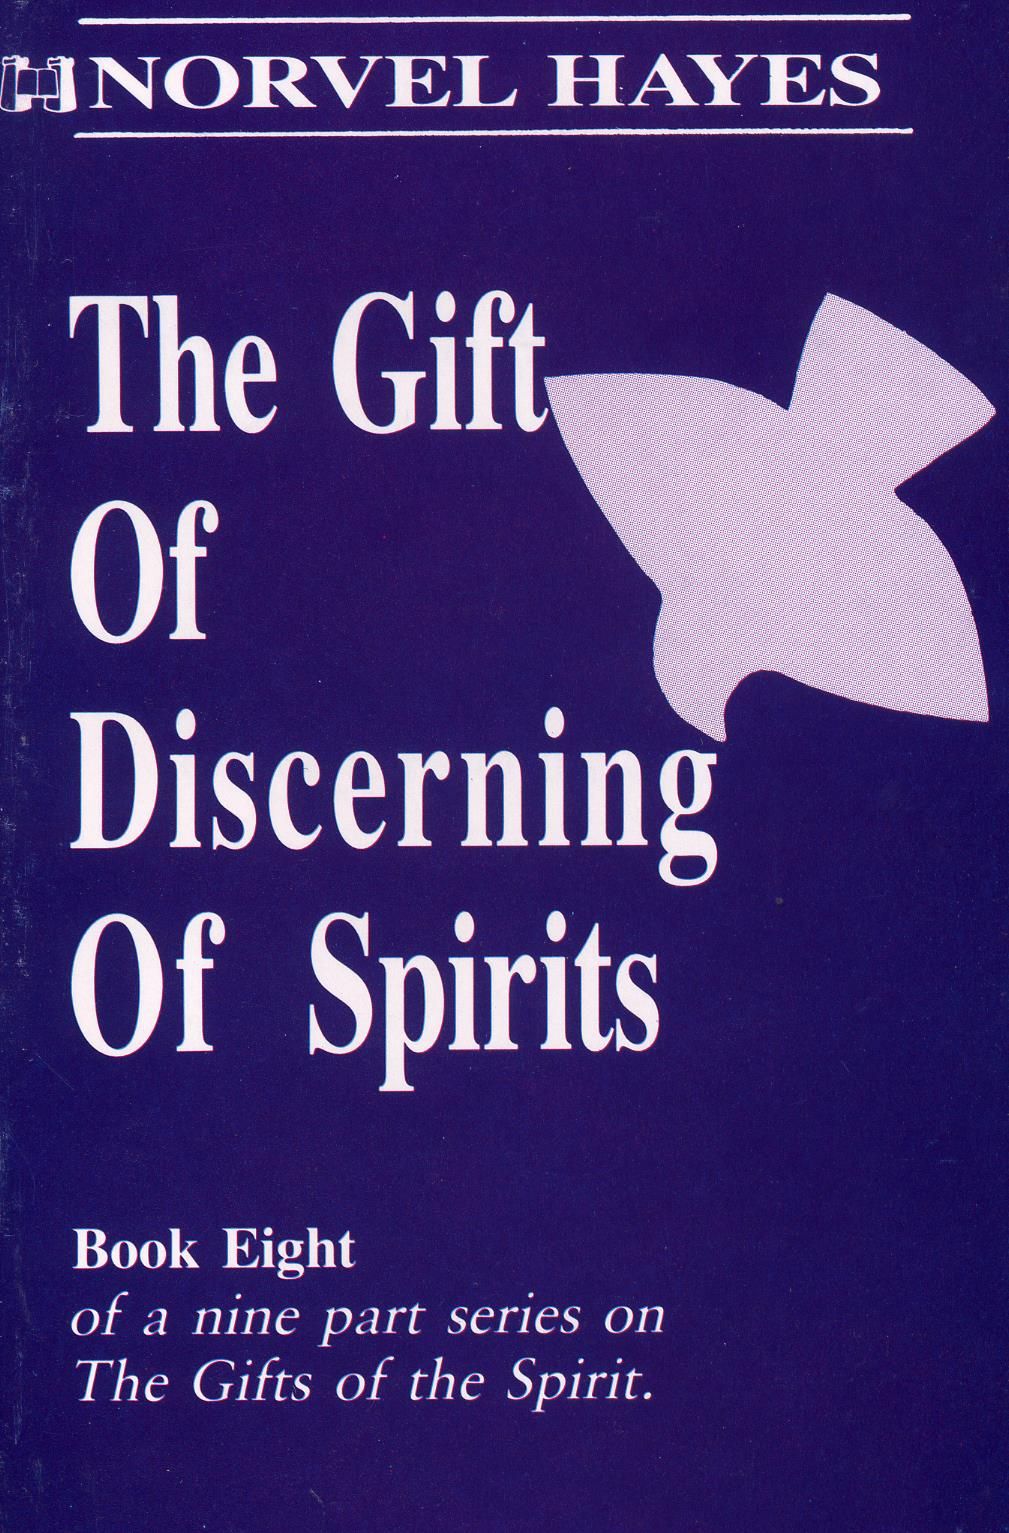 N.Hayes: The Gift of Discerning of Spirits